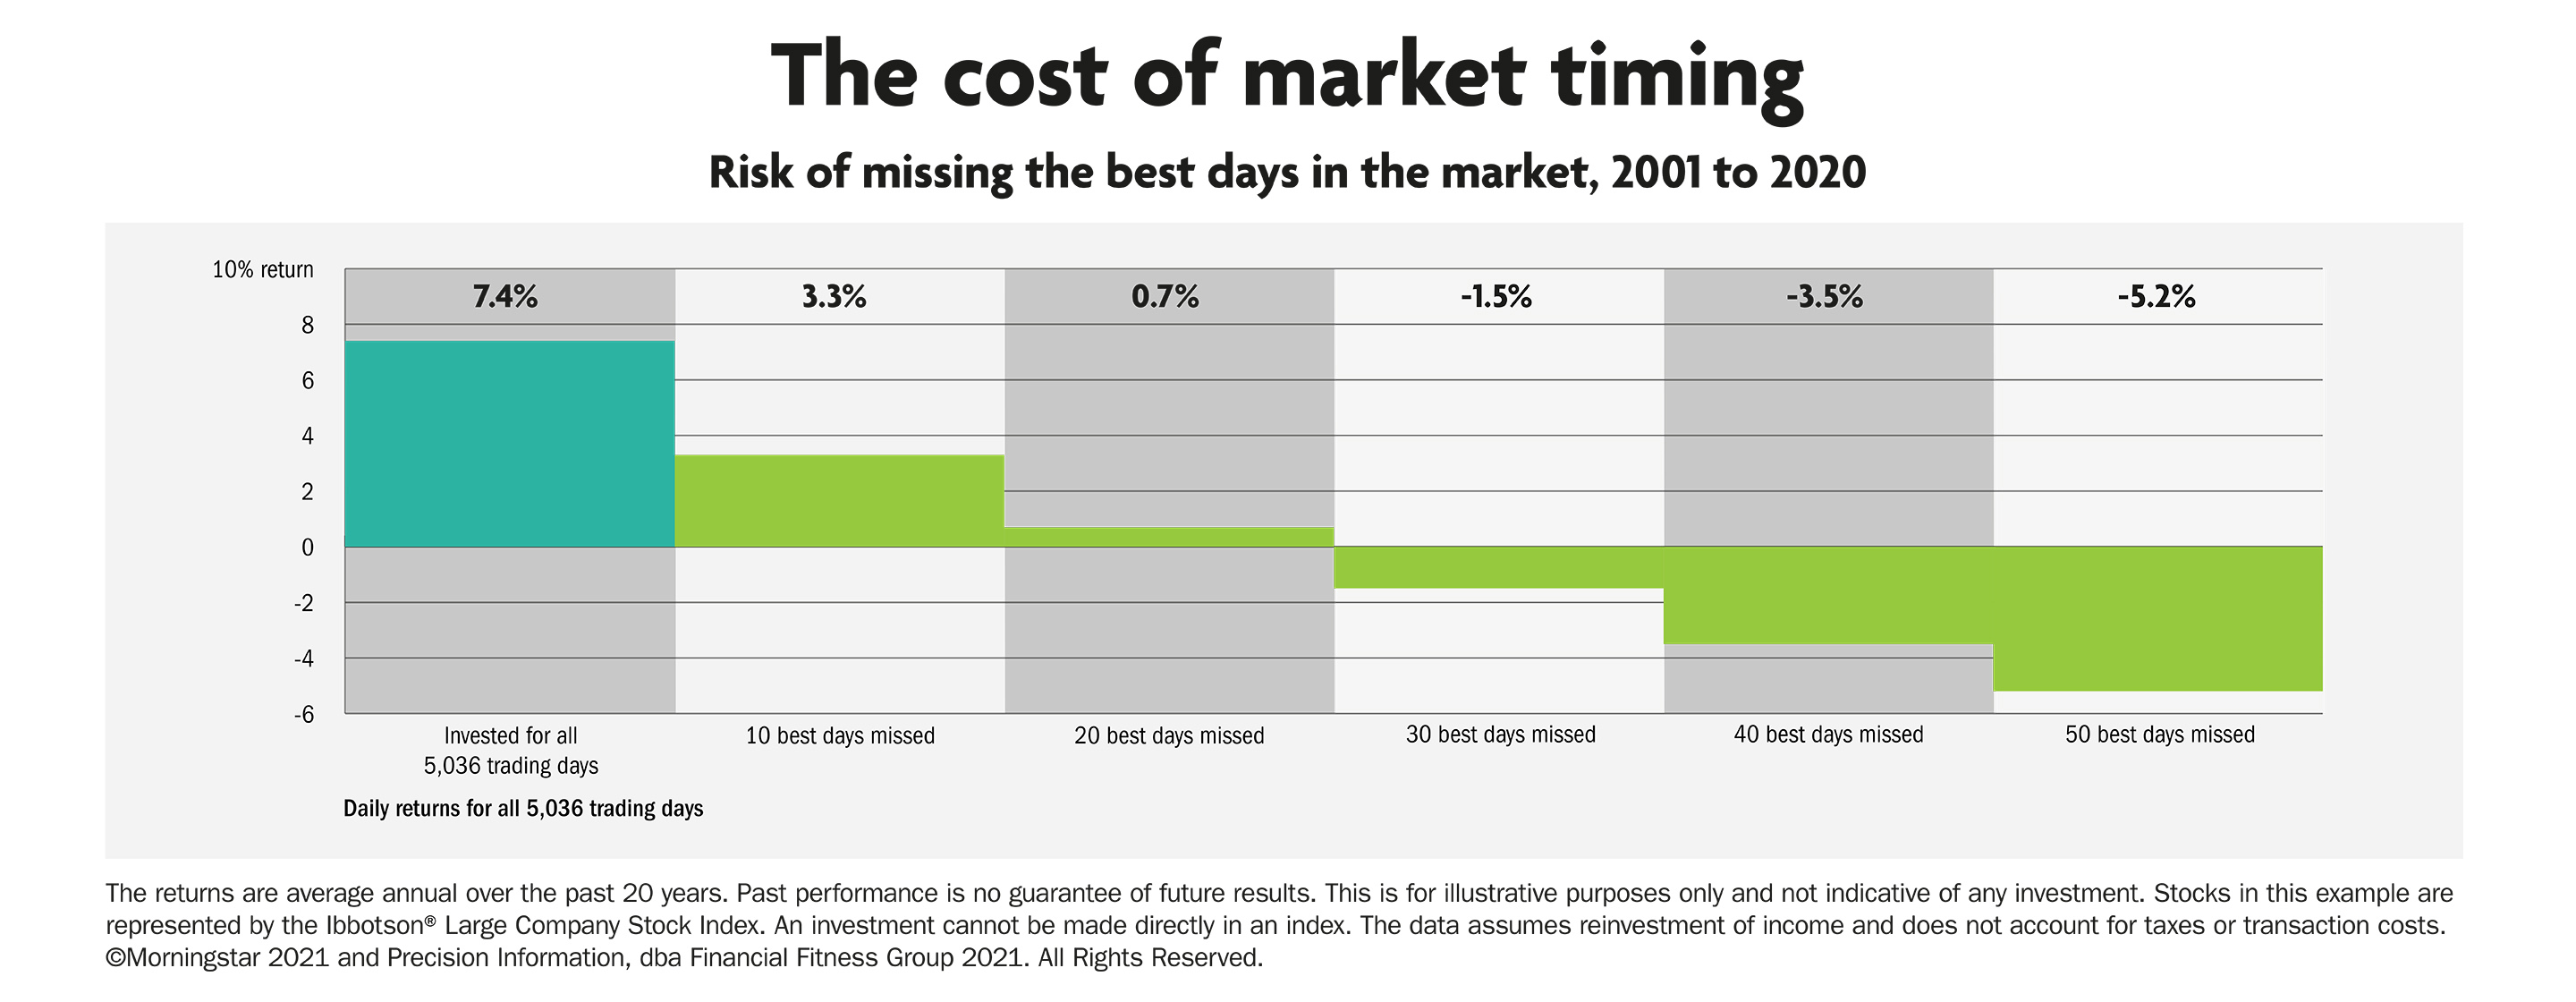 The cost of market timing